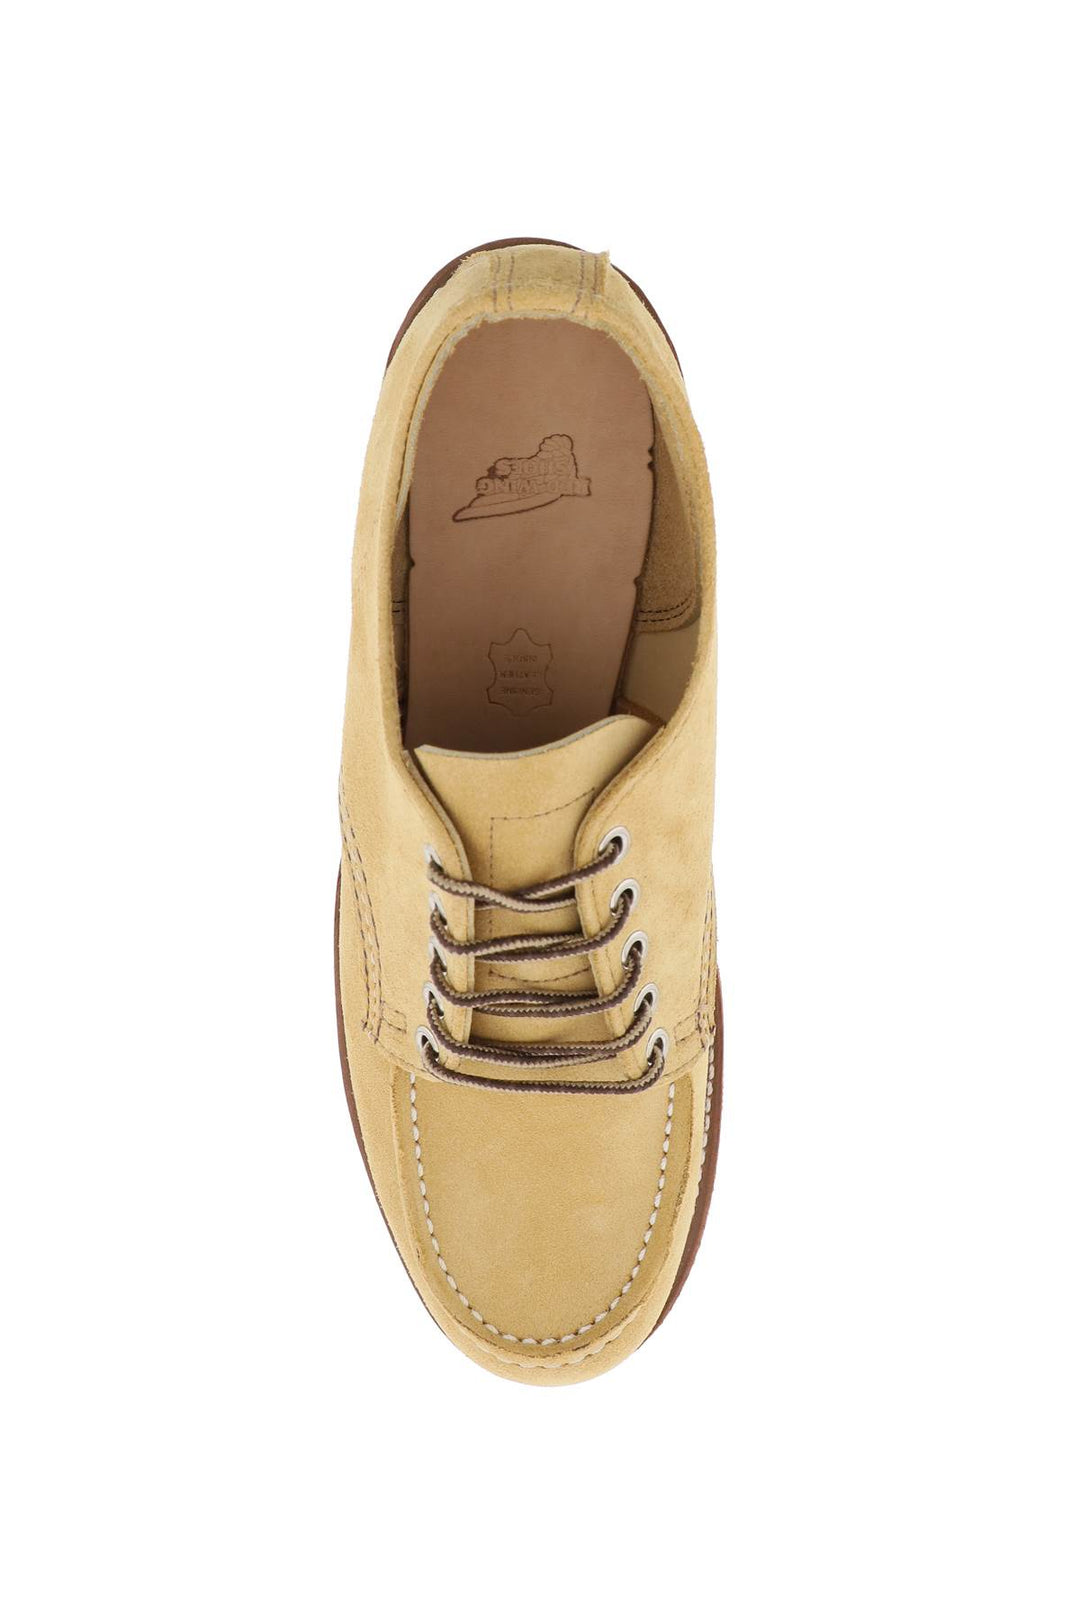 Red Wing Shoes Laced Moc Toe Oxford   Beige